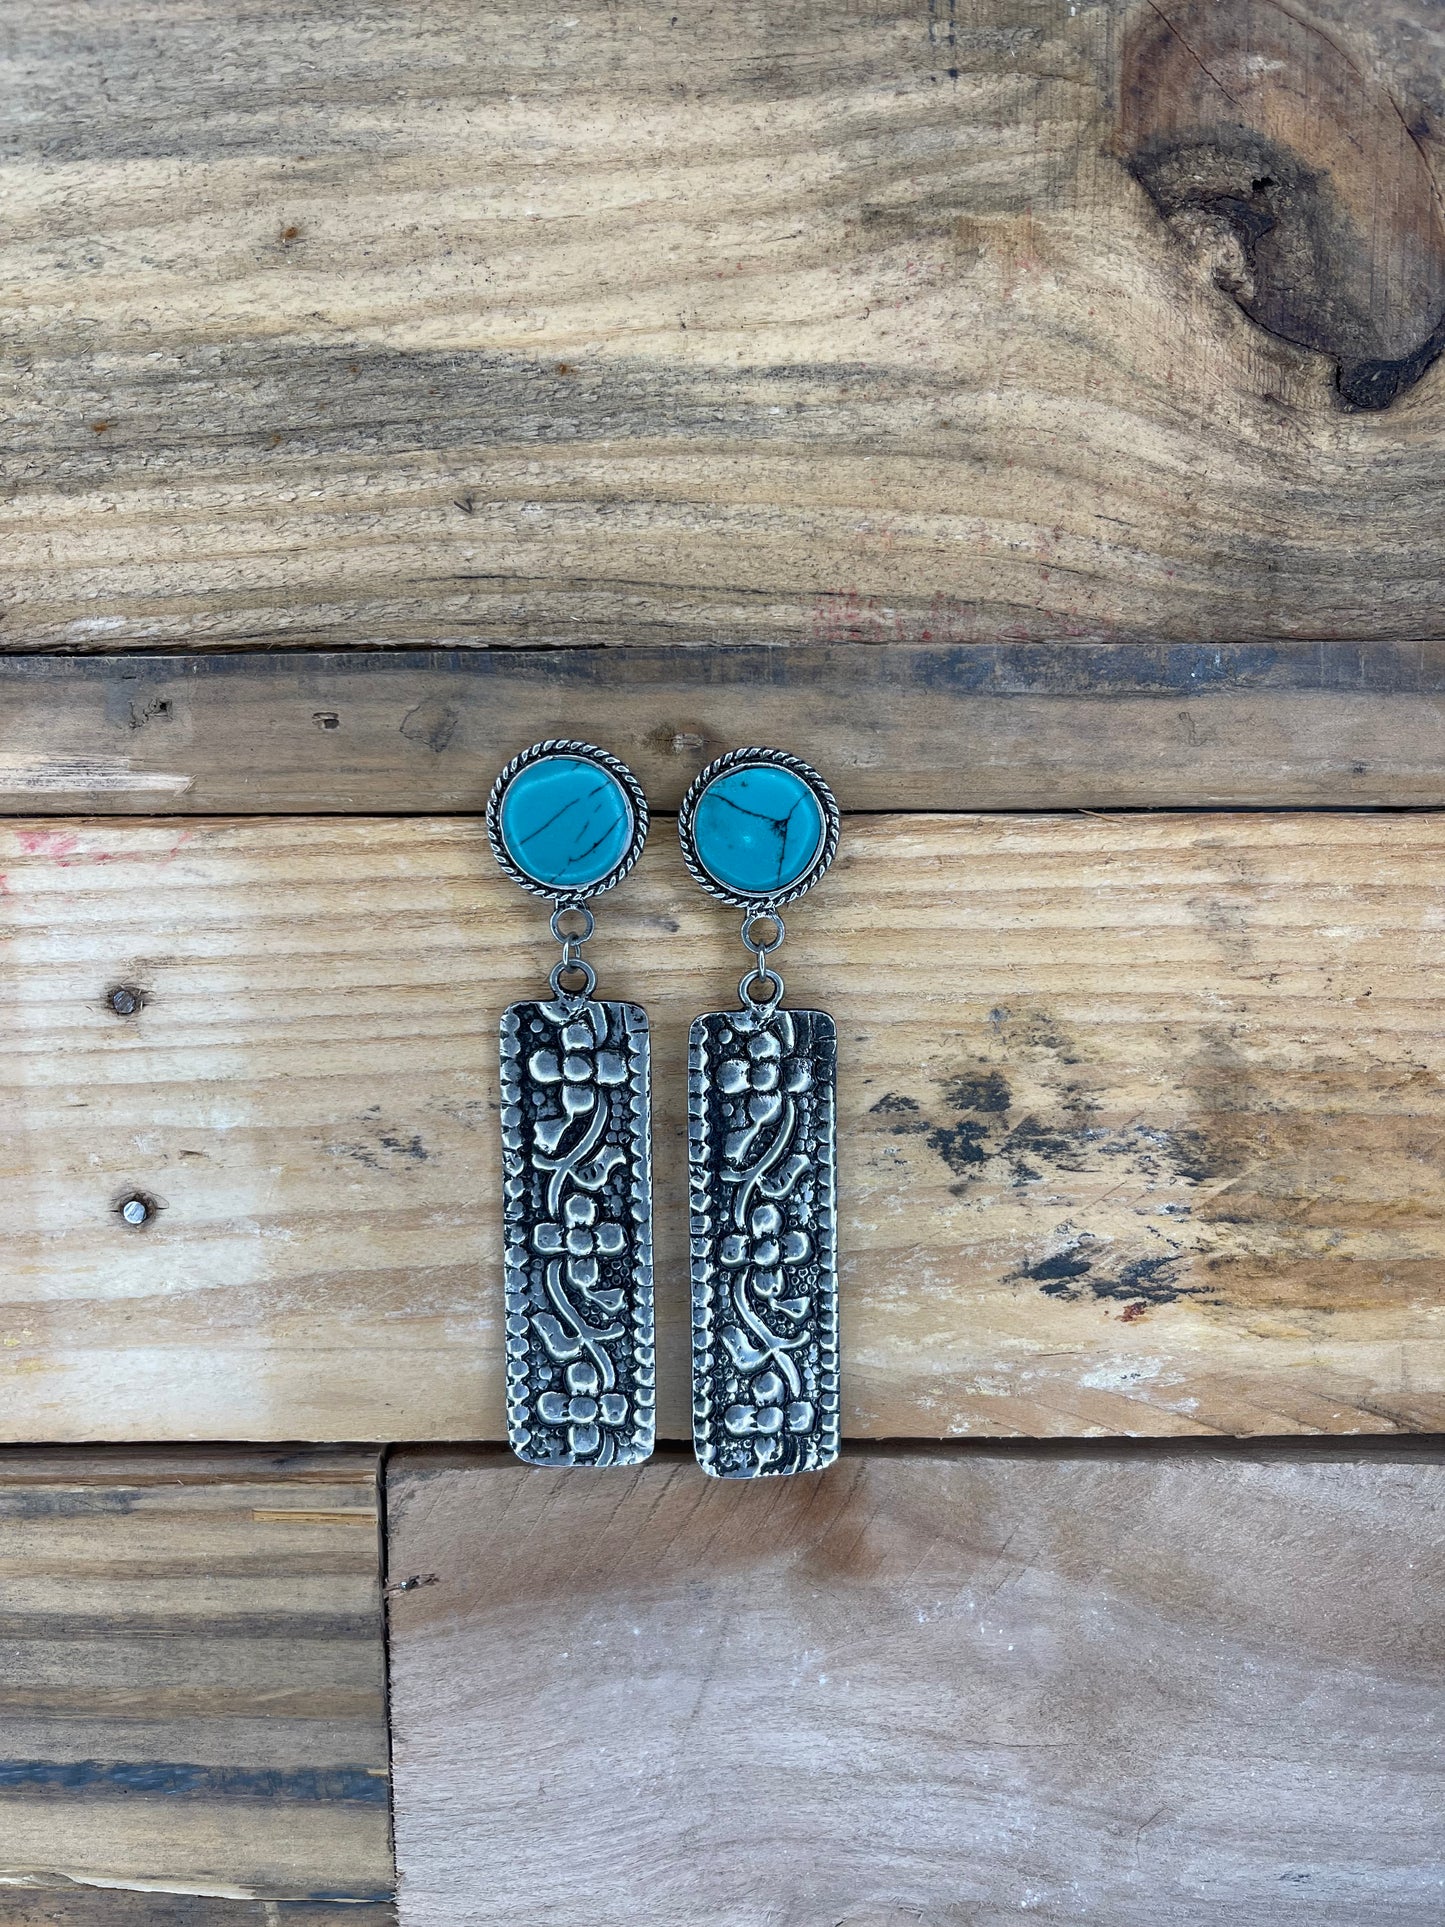 Earrings with round turquoise stone and tooled silver bar